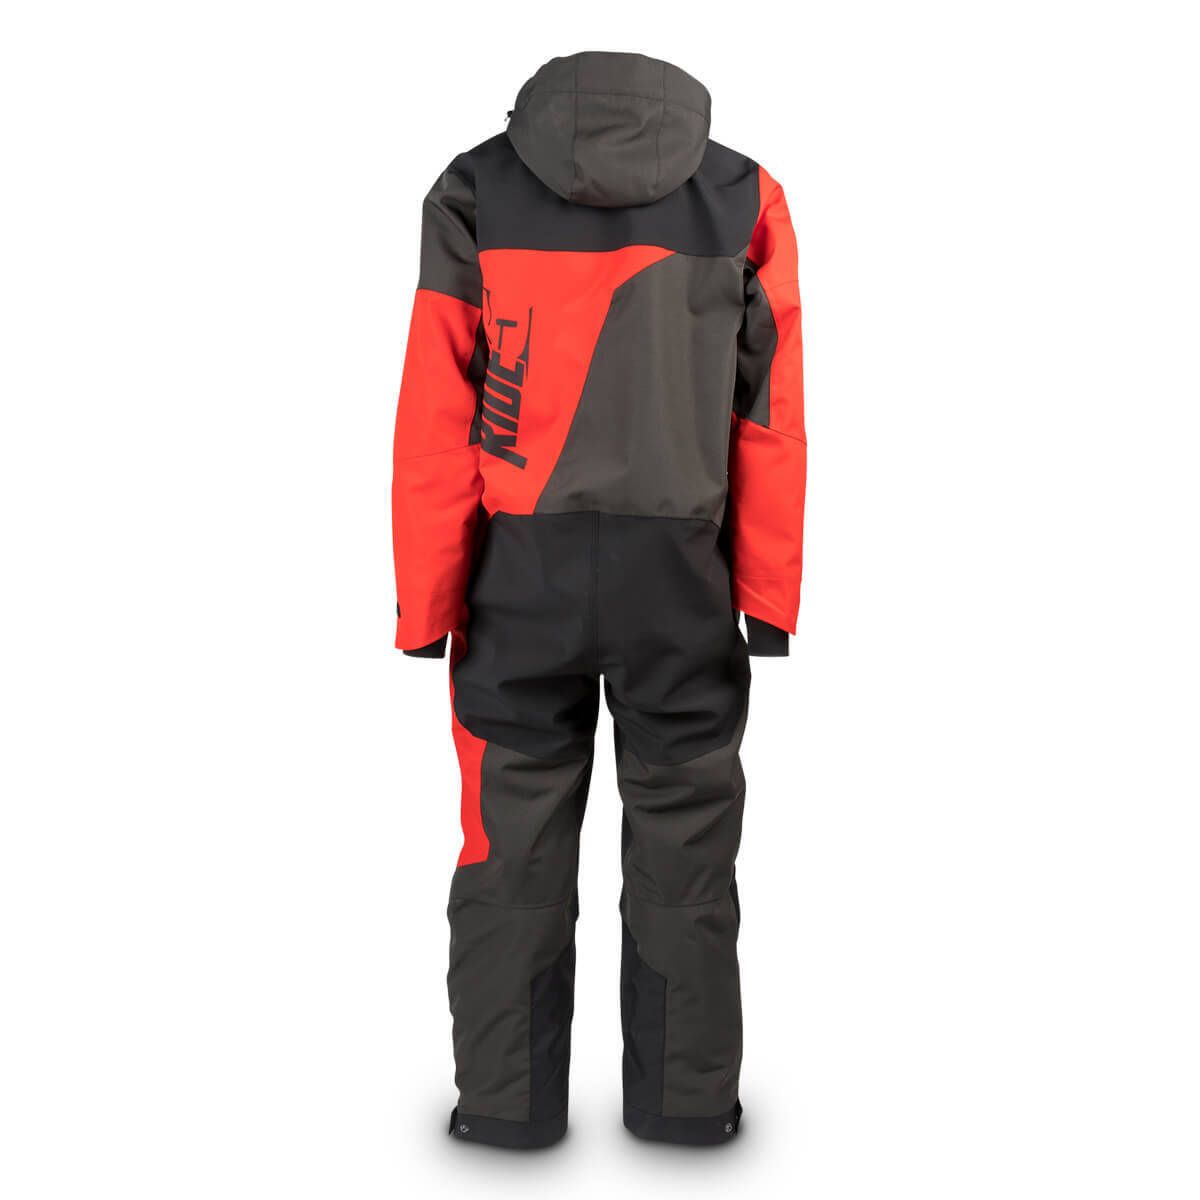 Allied Insulated mono Suit-Racing Red Xl